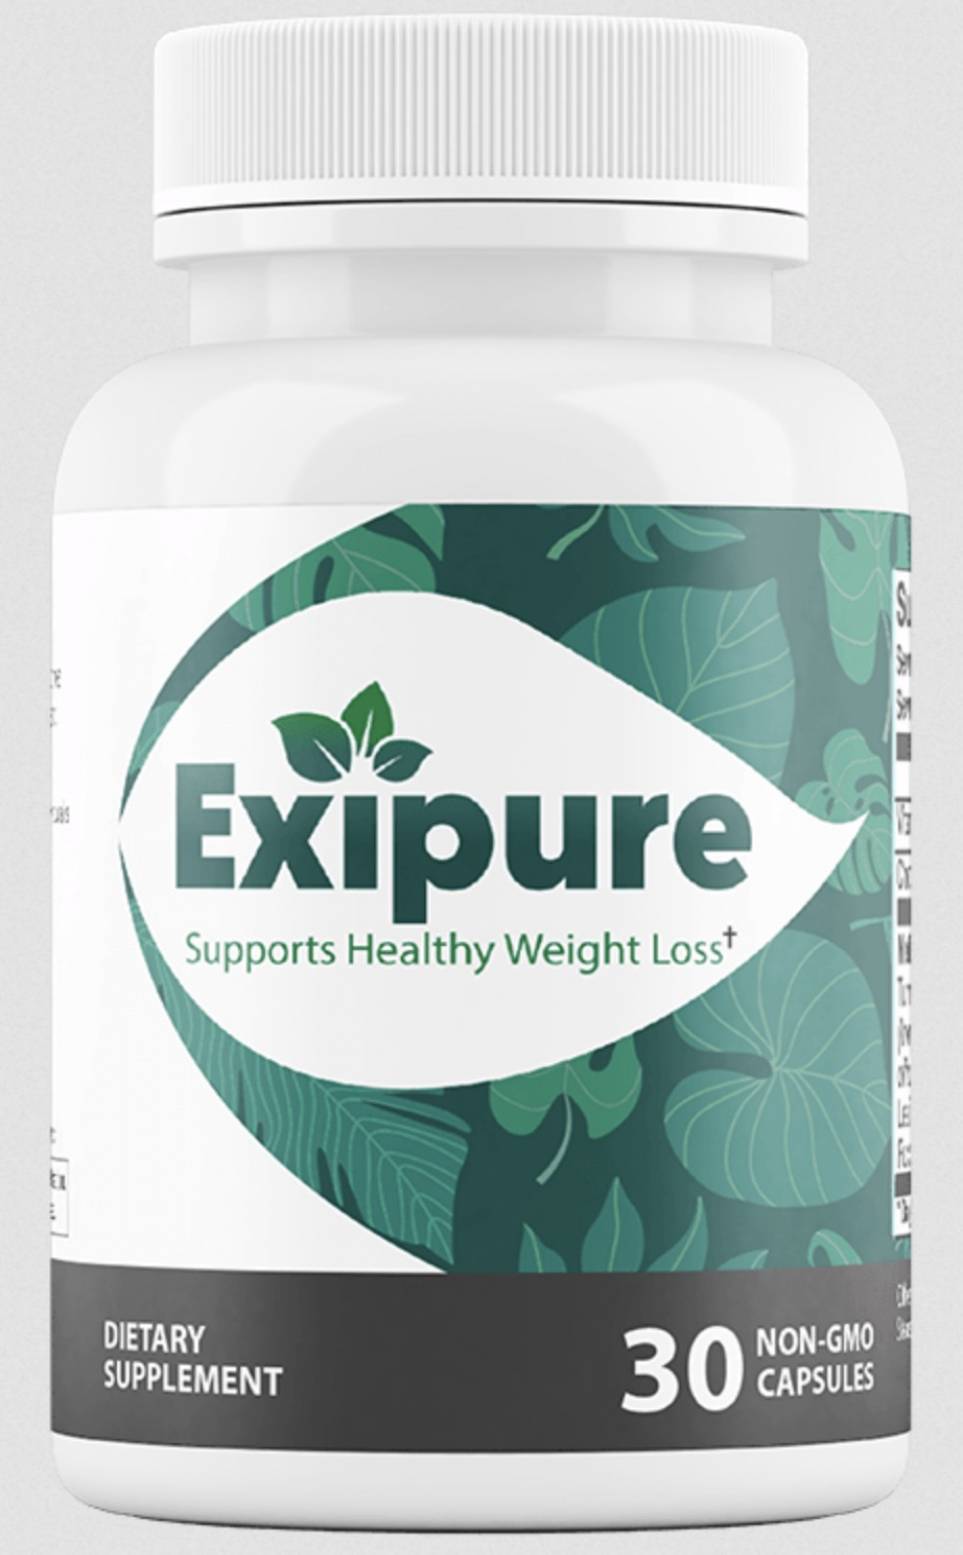 Is Exipure Safe To Take